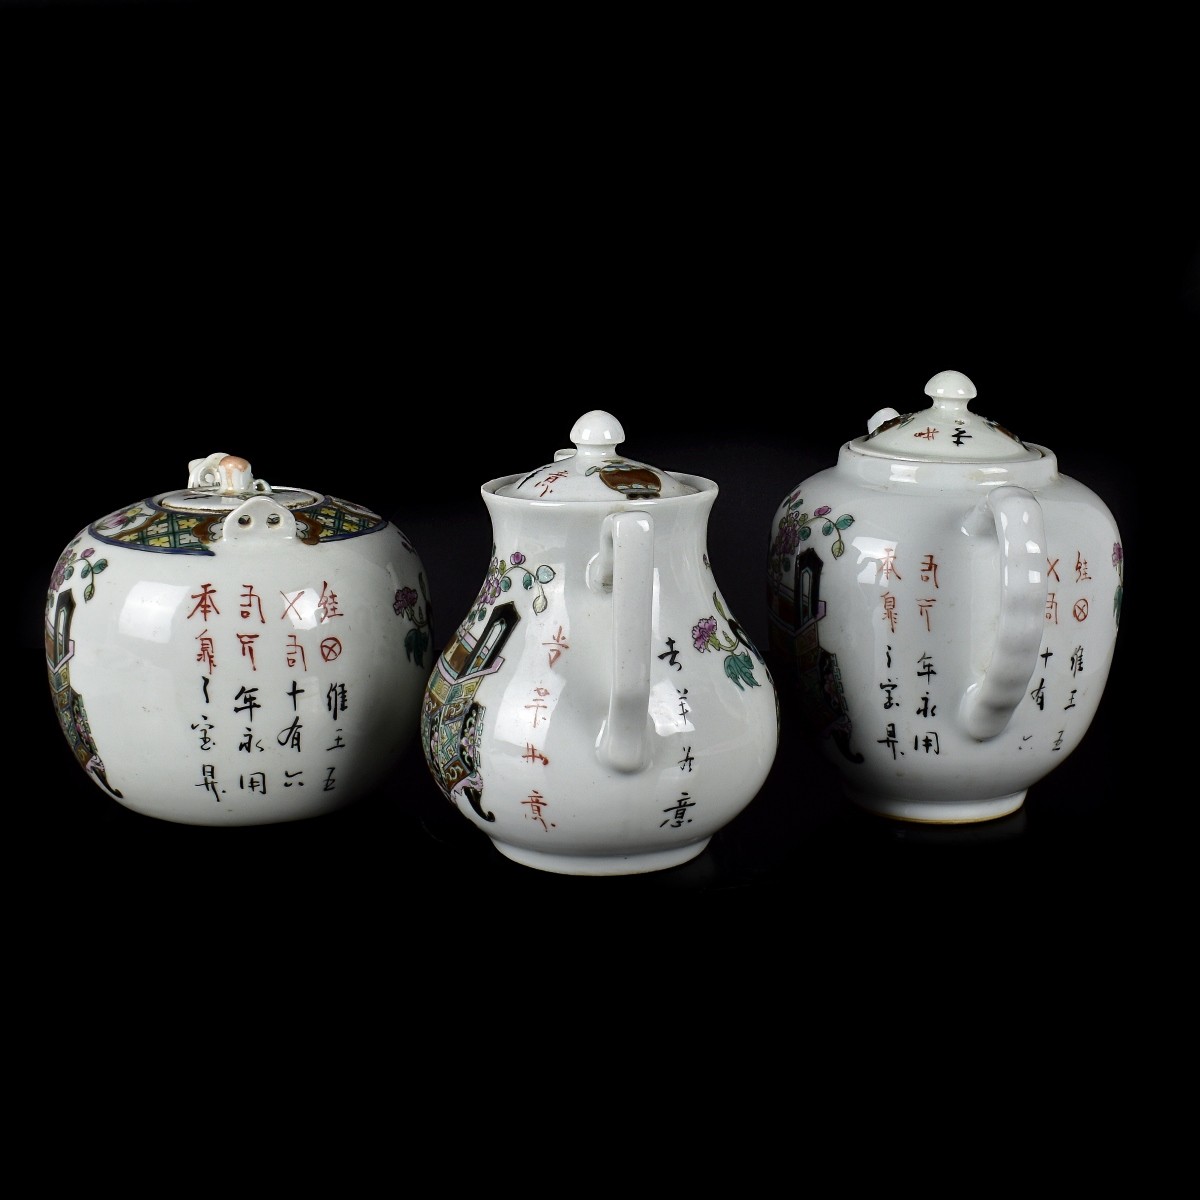 Three Chinese Porcelain Teapots